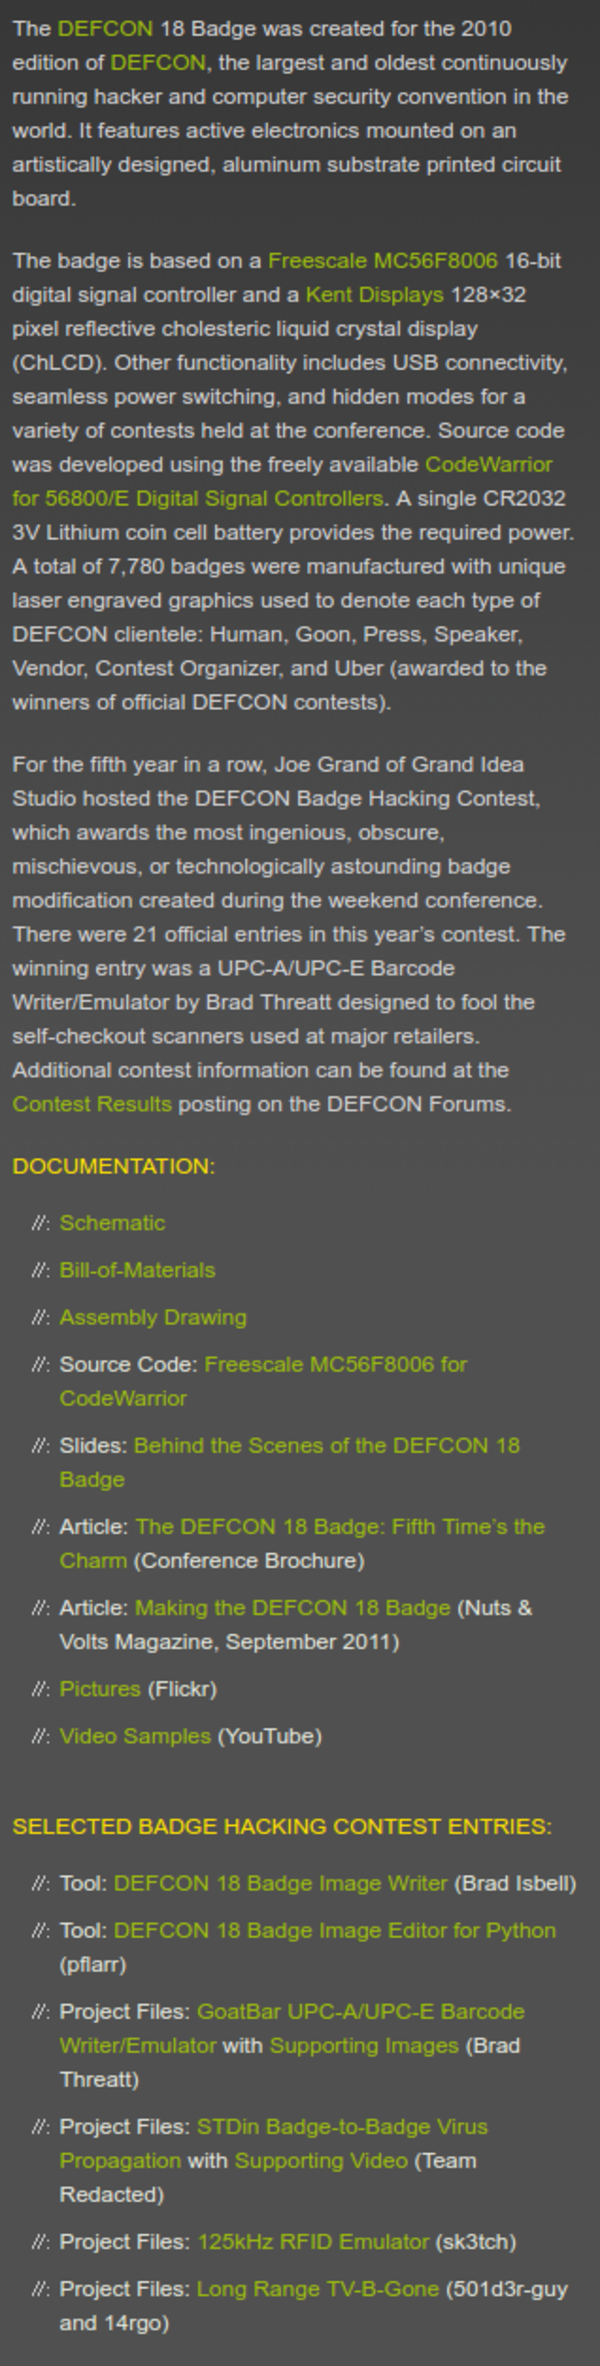 ./20161106-1520-cet-state-of-the-art-7-def-con-badges-4.png